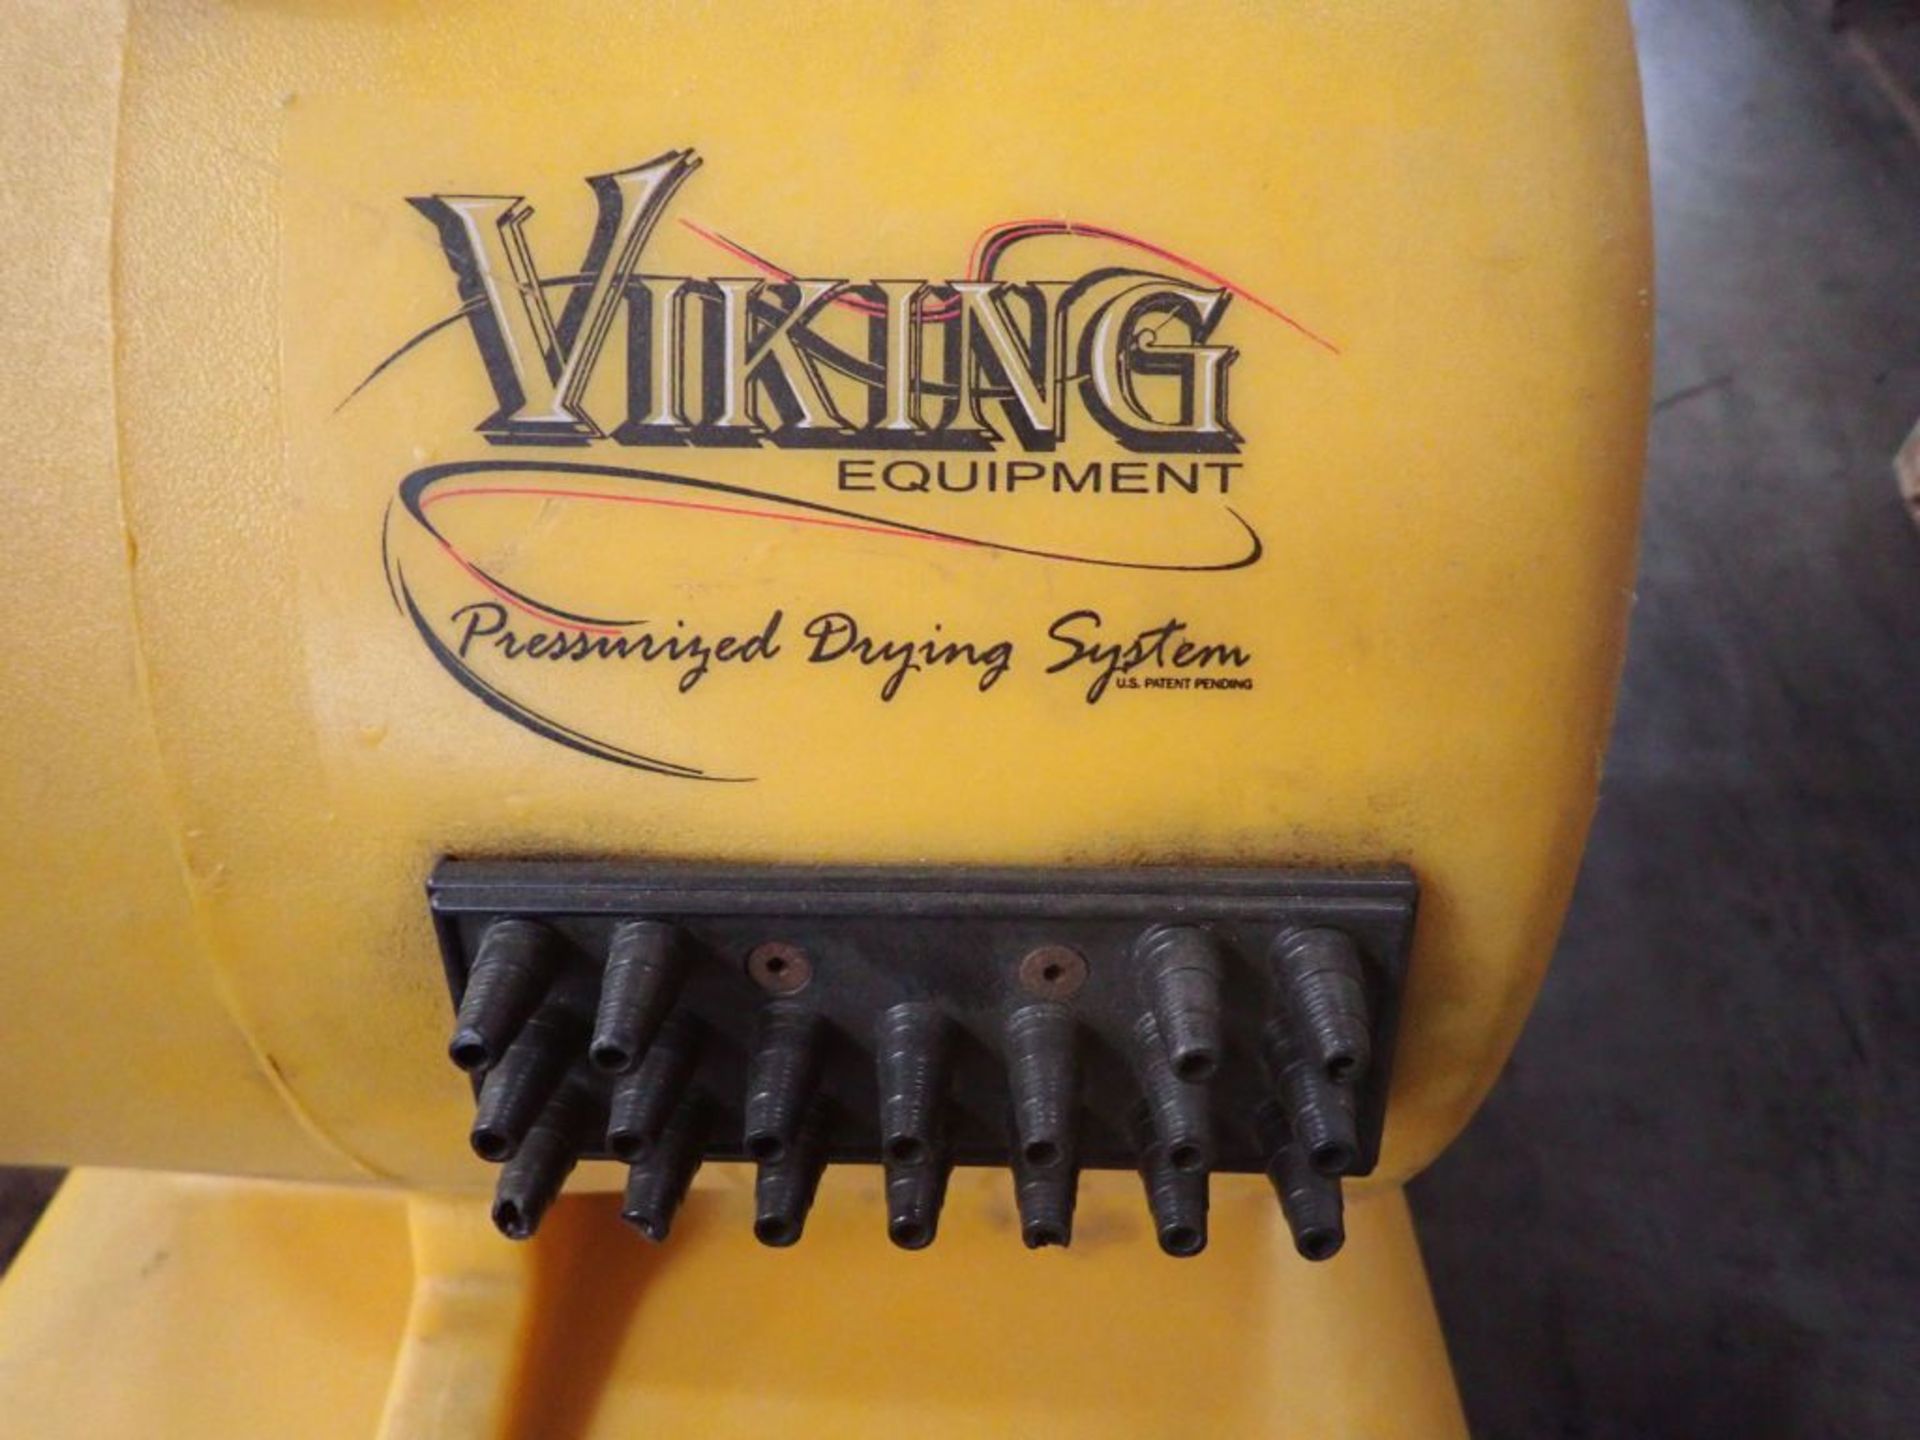 Lot of (2) Viking Equipment Pressurized Drying Systems - Image 9 of 10